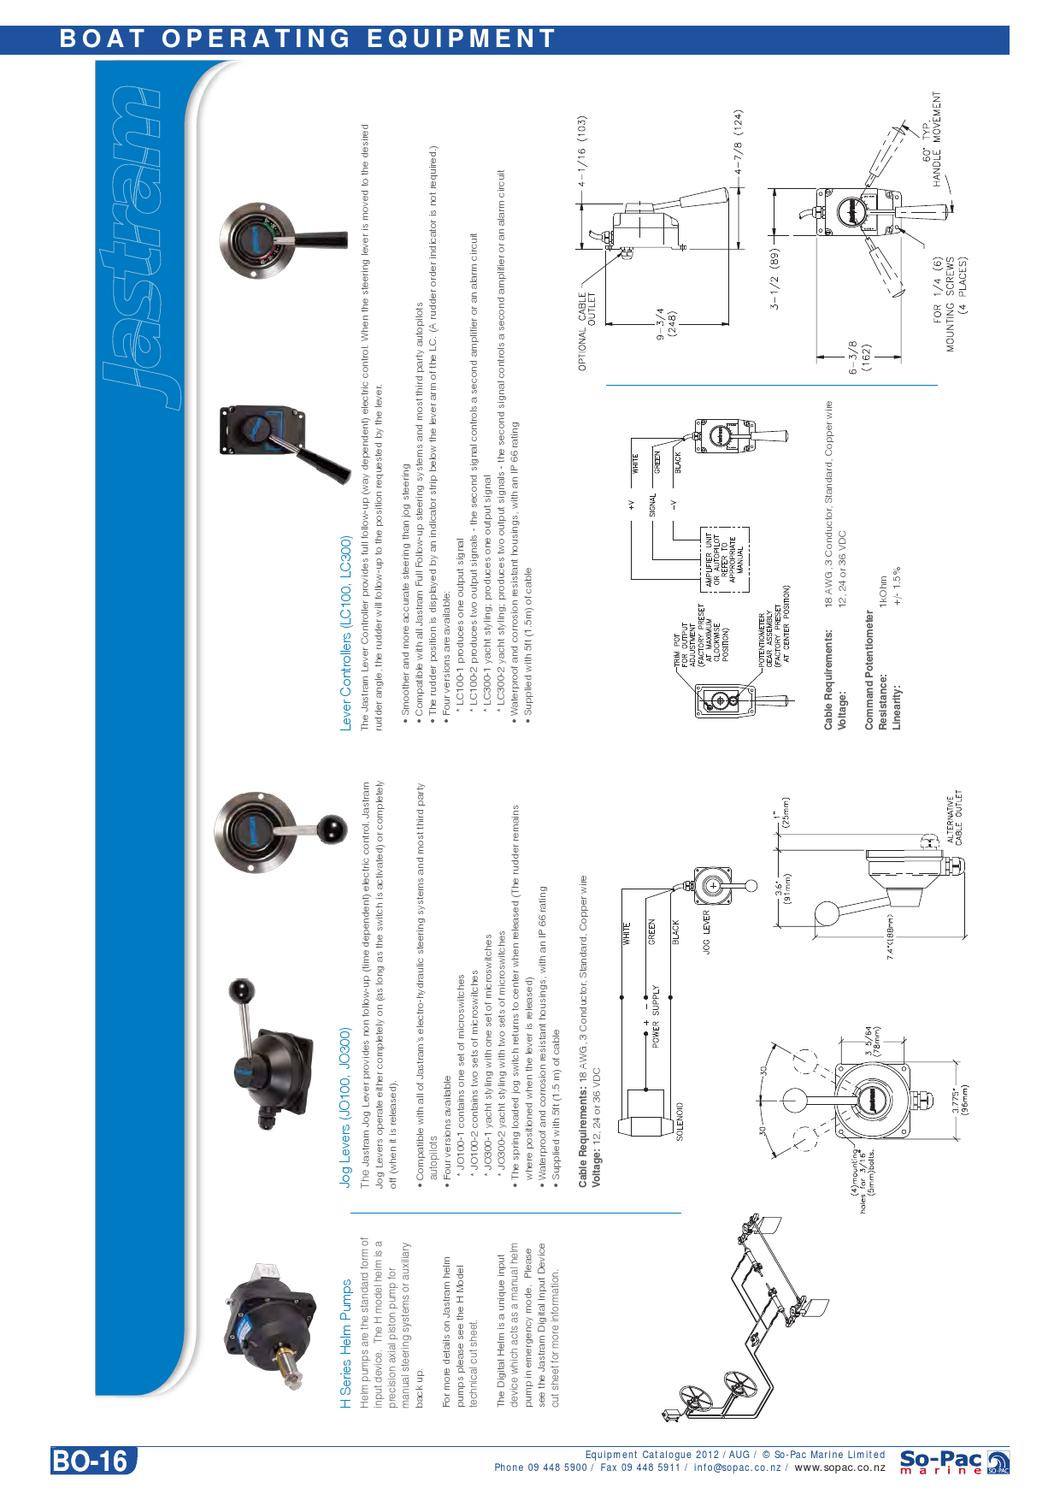 Jog Lever Steering Wiring Diagram so-pac Marine 2012 Equipment Catalogue by so-pac Marine – issuu Of Jog Lever Steering Wiring Diagram